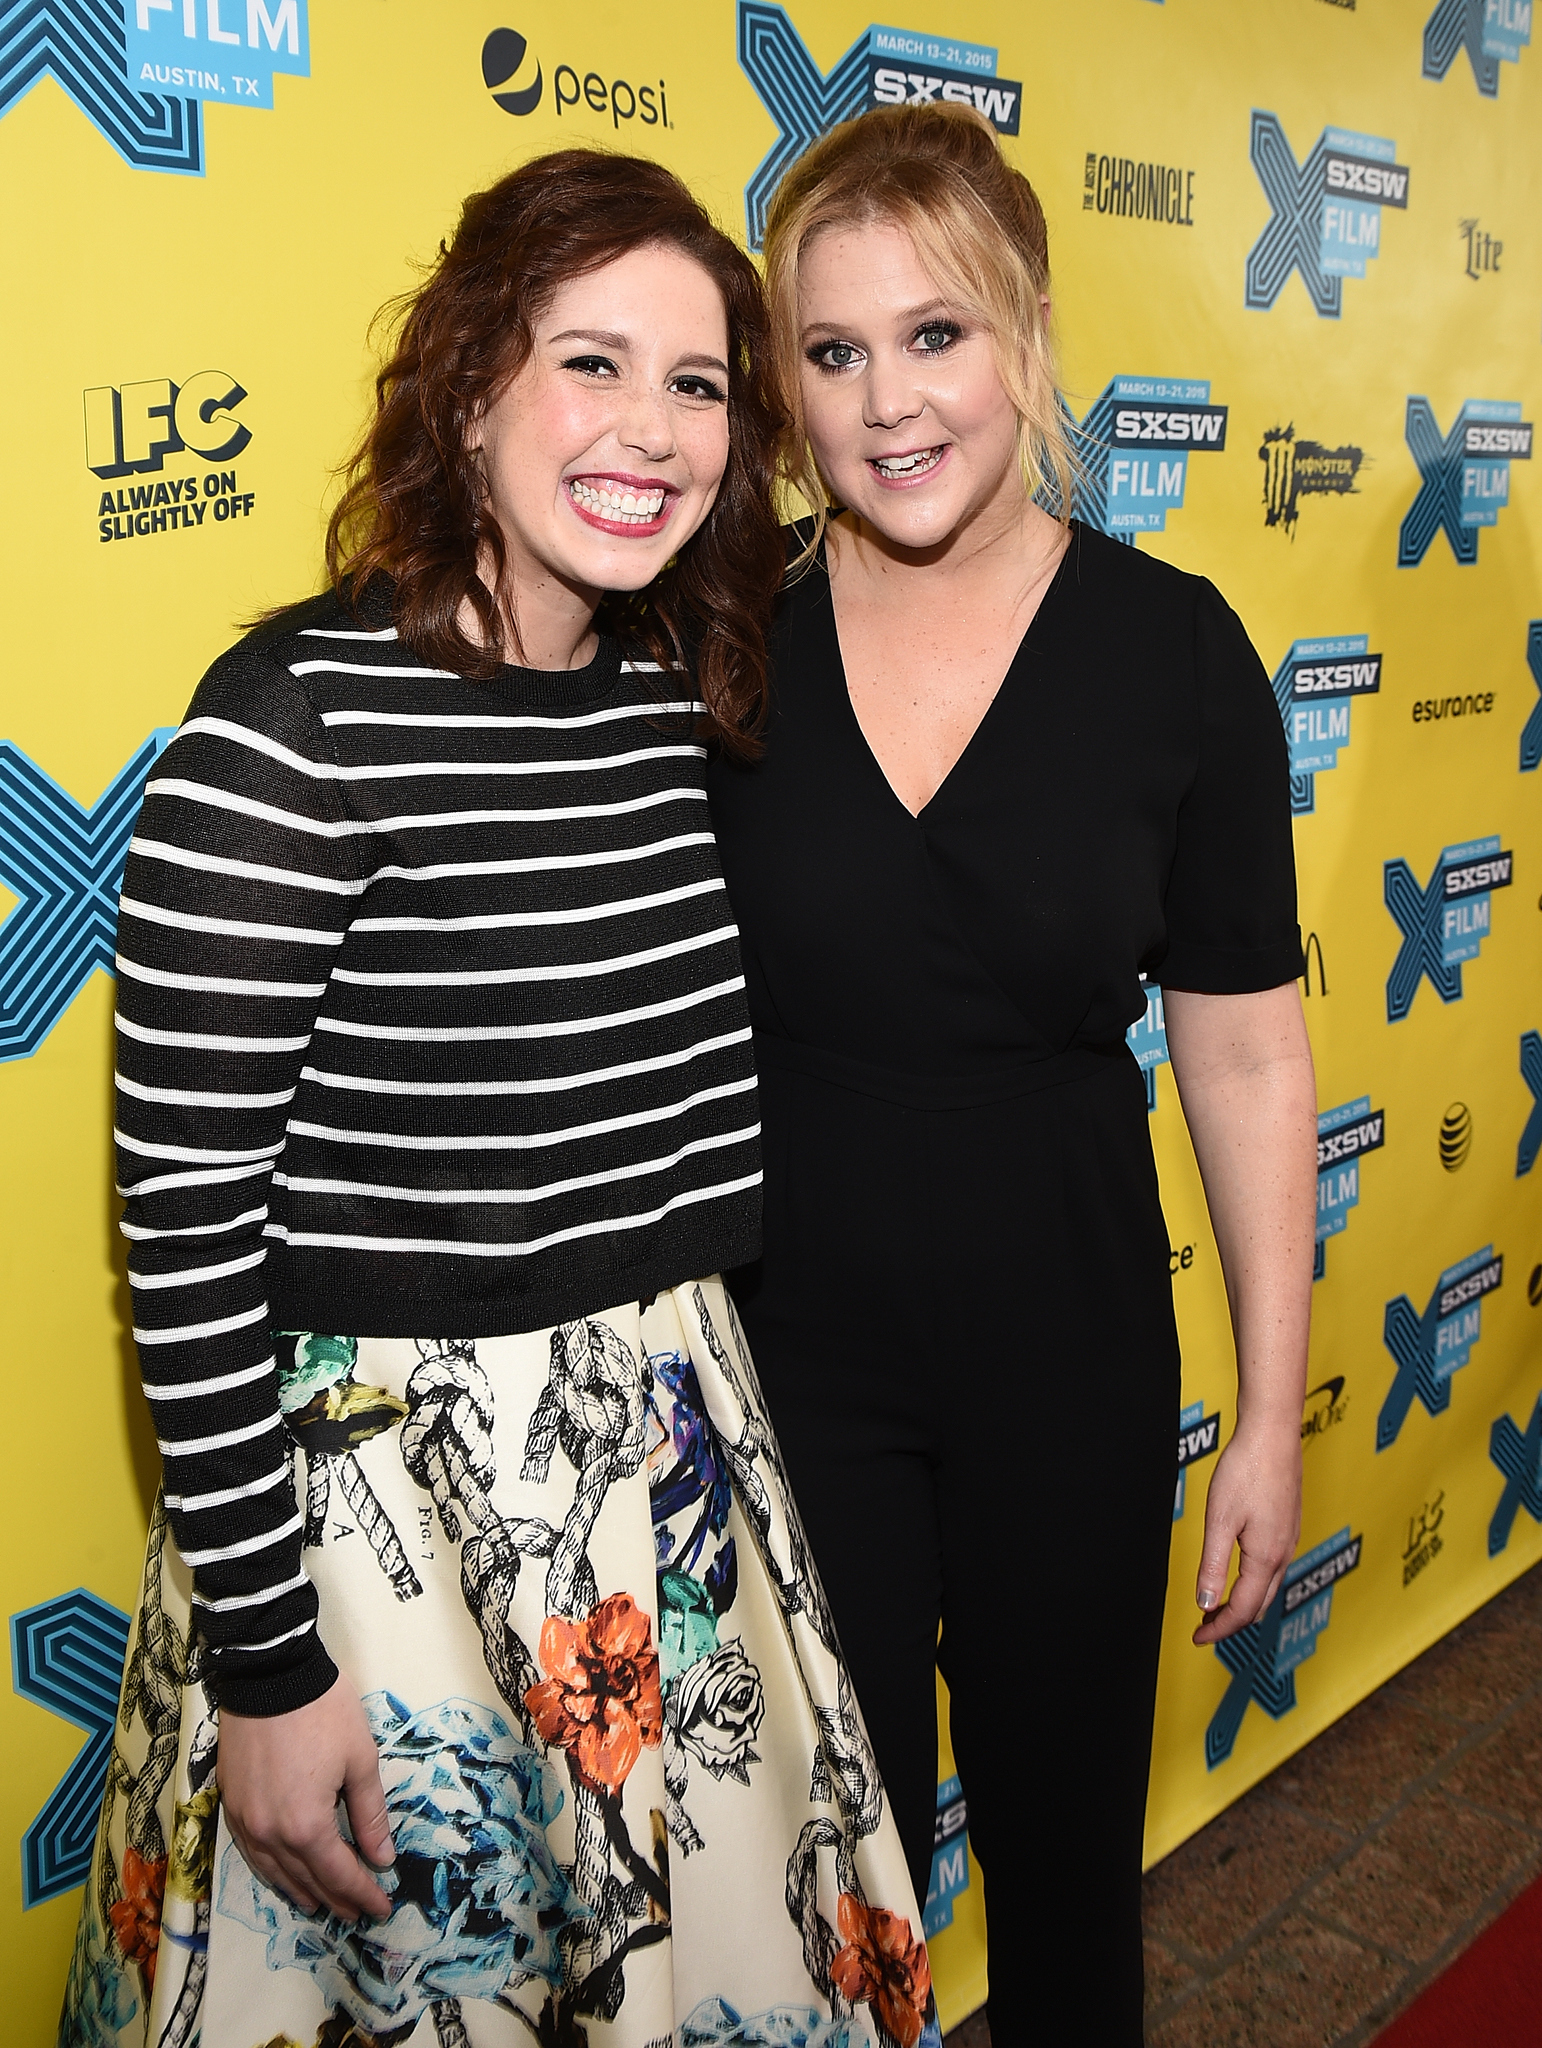 Amy Schumer and Vanessa Bayer at event of Be stabdziu (2015)